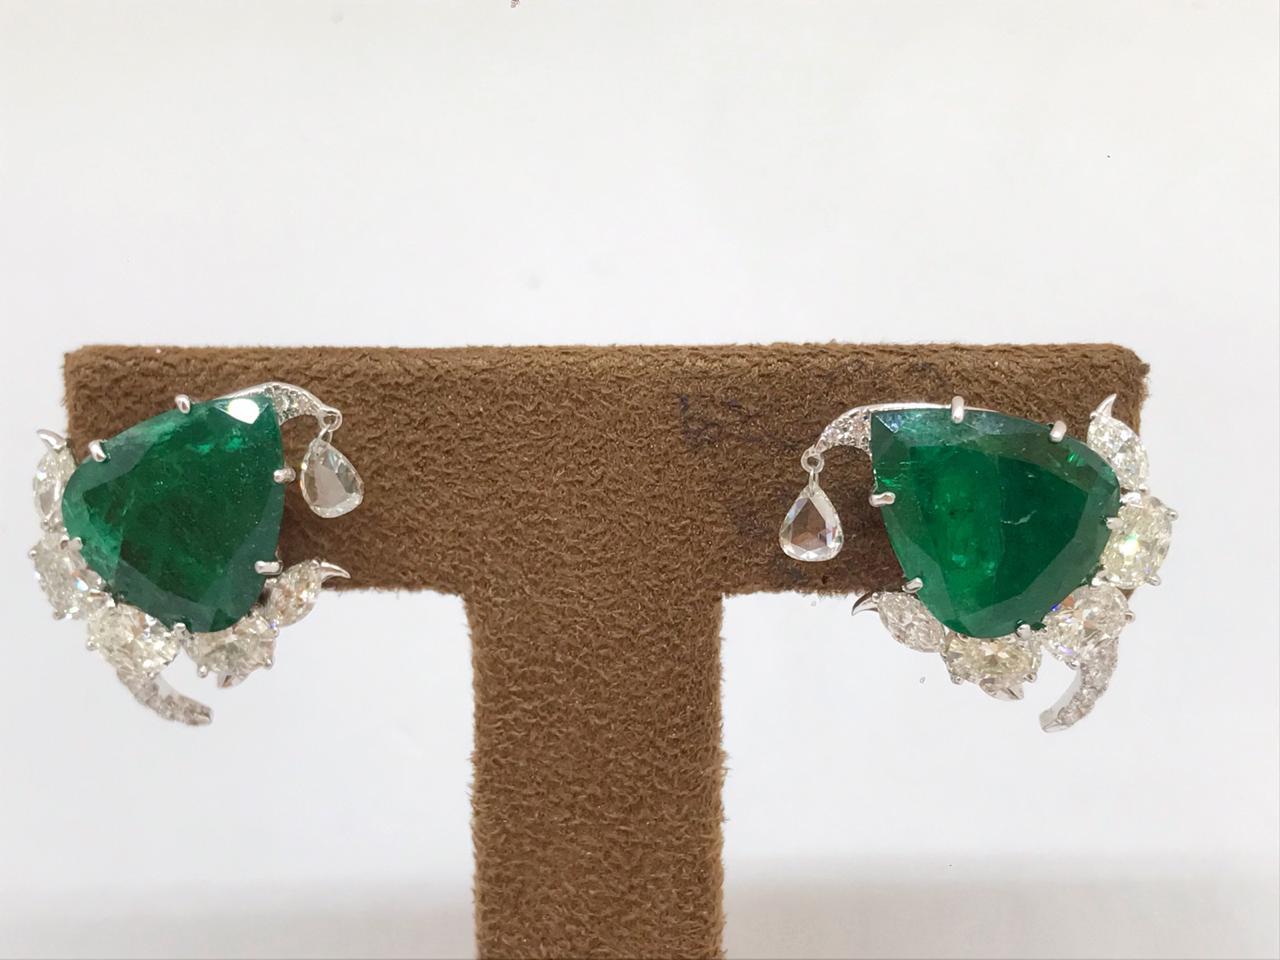 A beautiful Zambian emerald pair is set in these ear clips which has a detailed back and is embedded with brilliant cut diamonds. These ear clips are designed with modern sensibilities where the Zambian emerald pair is the hero. Diamonds around the